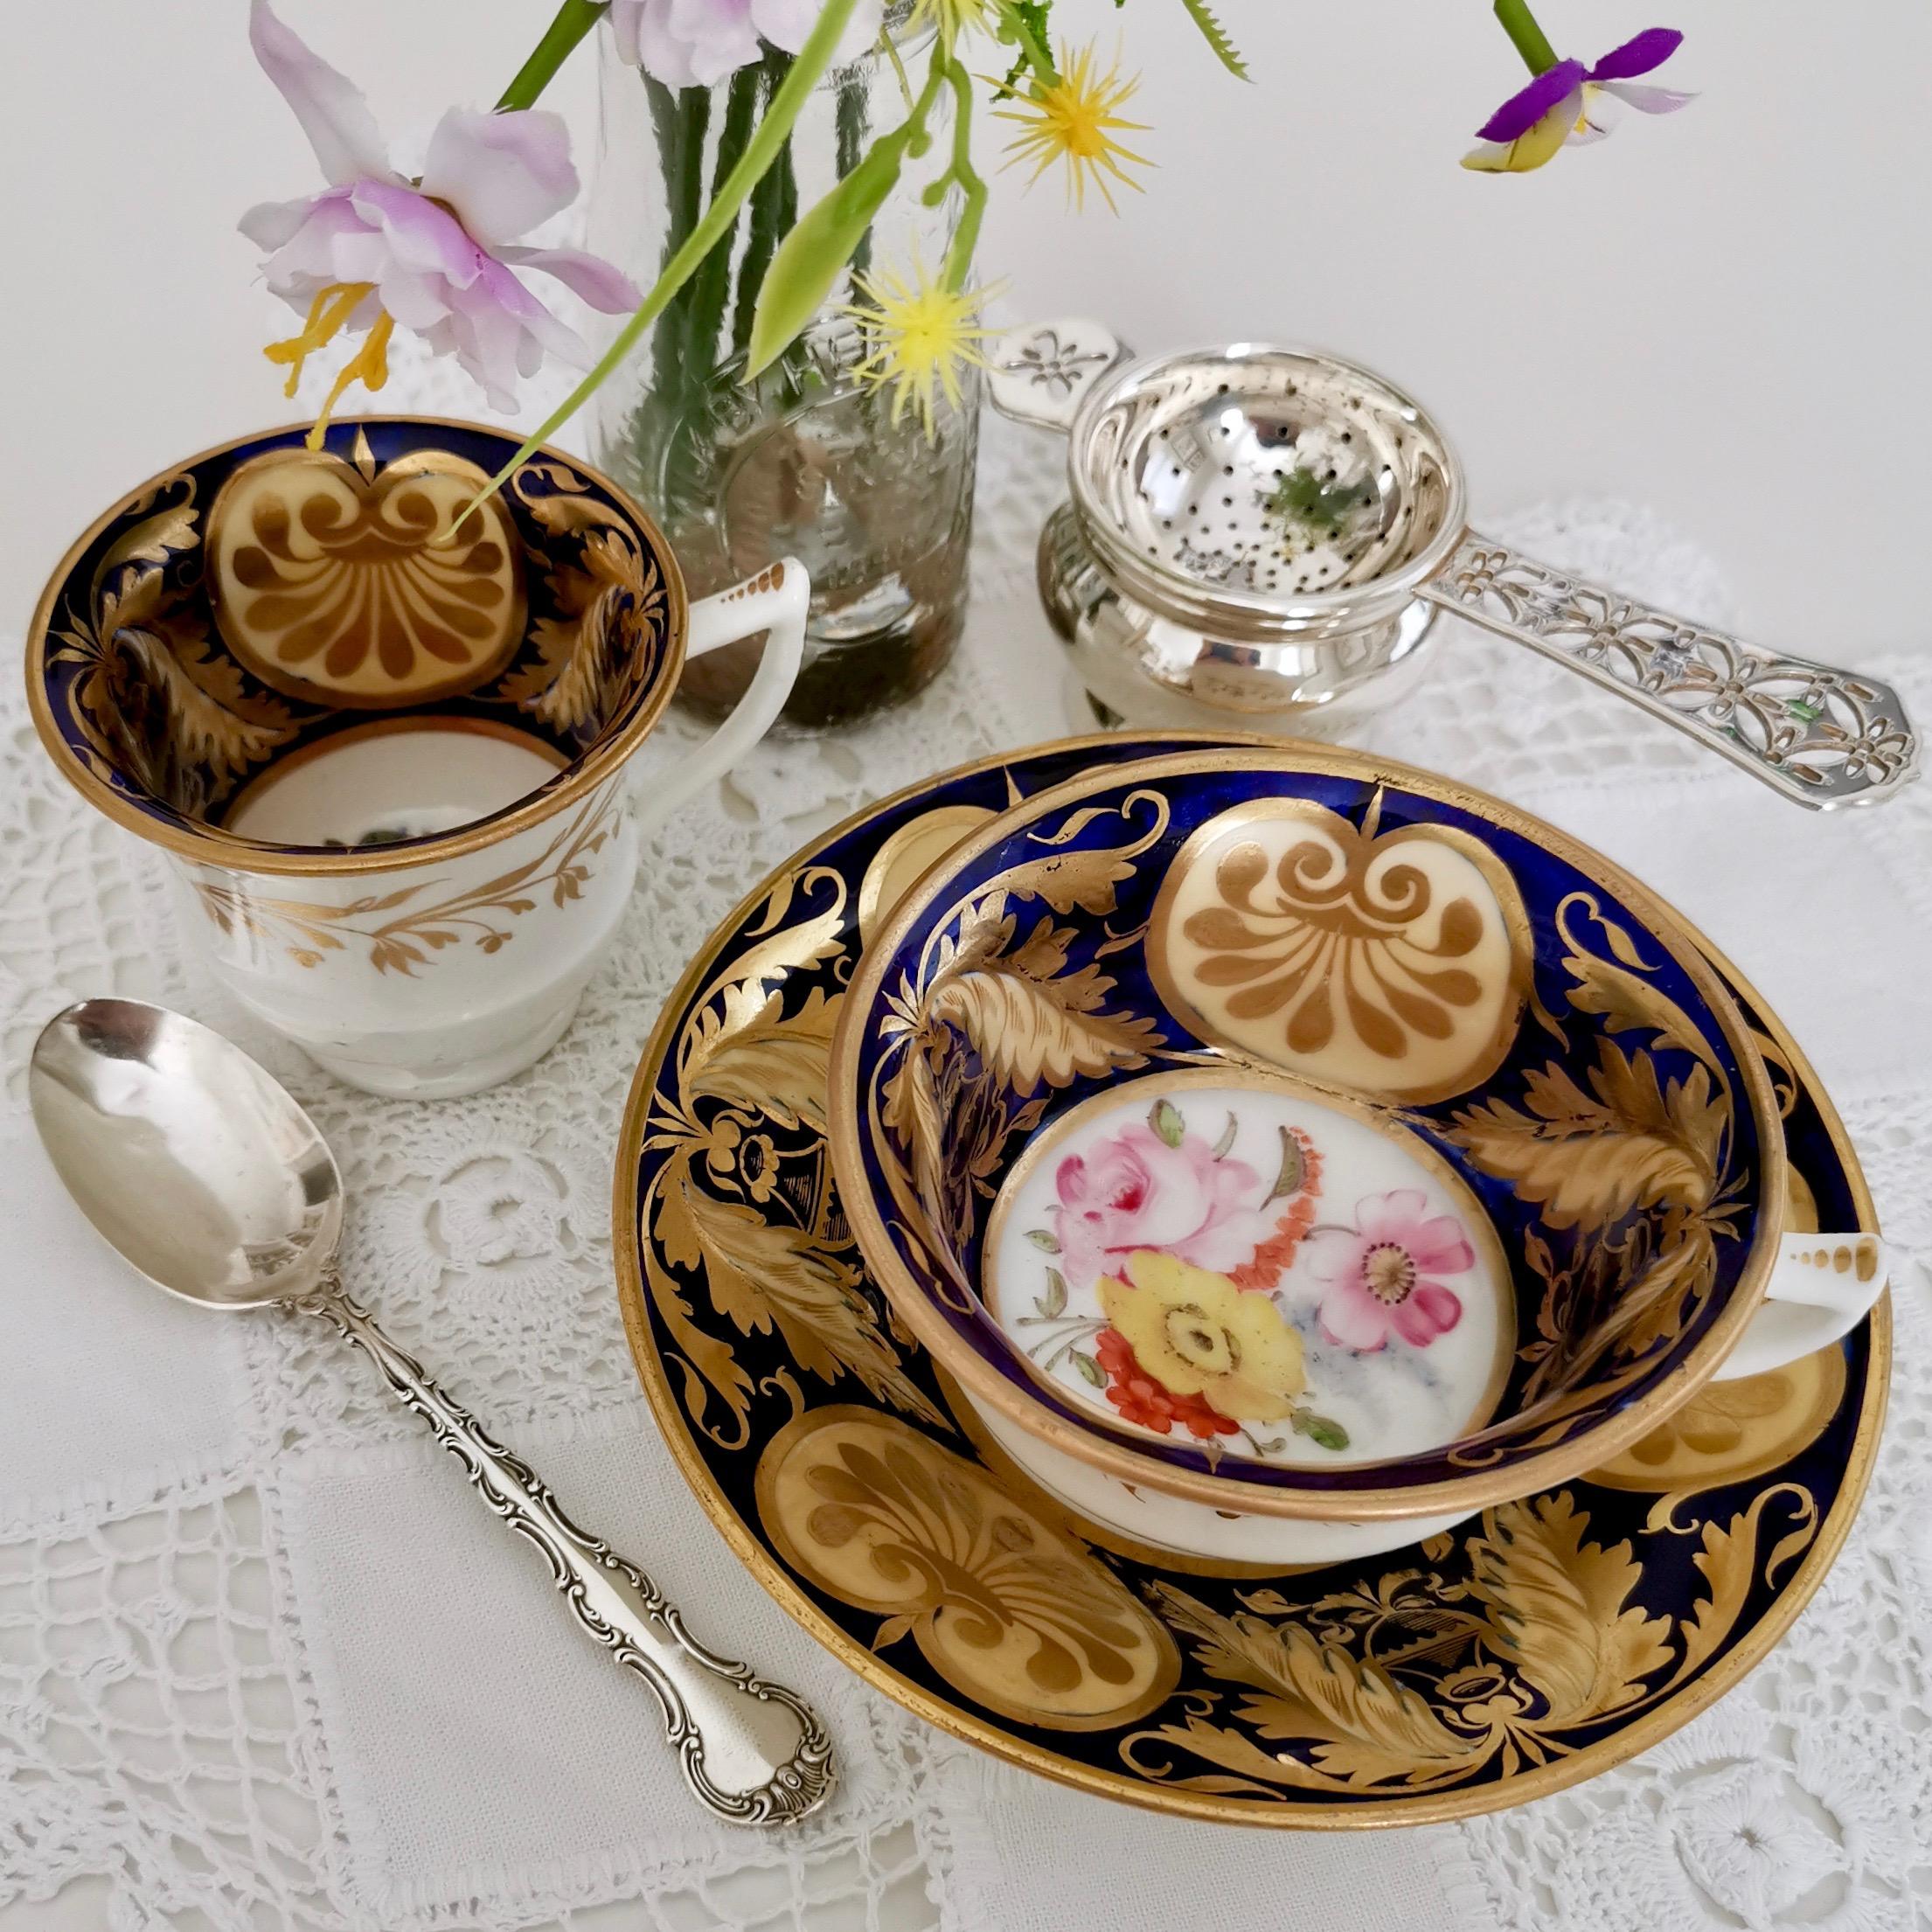 This is a beautiful trio made by an unknown Staffordshire maker circa 1820. The trio consists of a teacup, coffee cup and saucer. In the early 19th century teacups and coffee cups were sold sharing the same saucer - you would never drink tea and